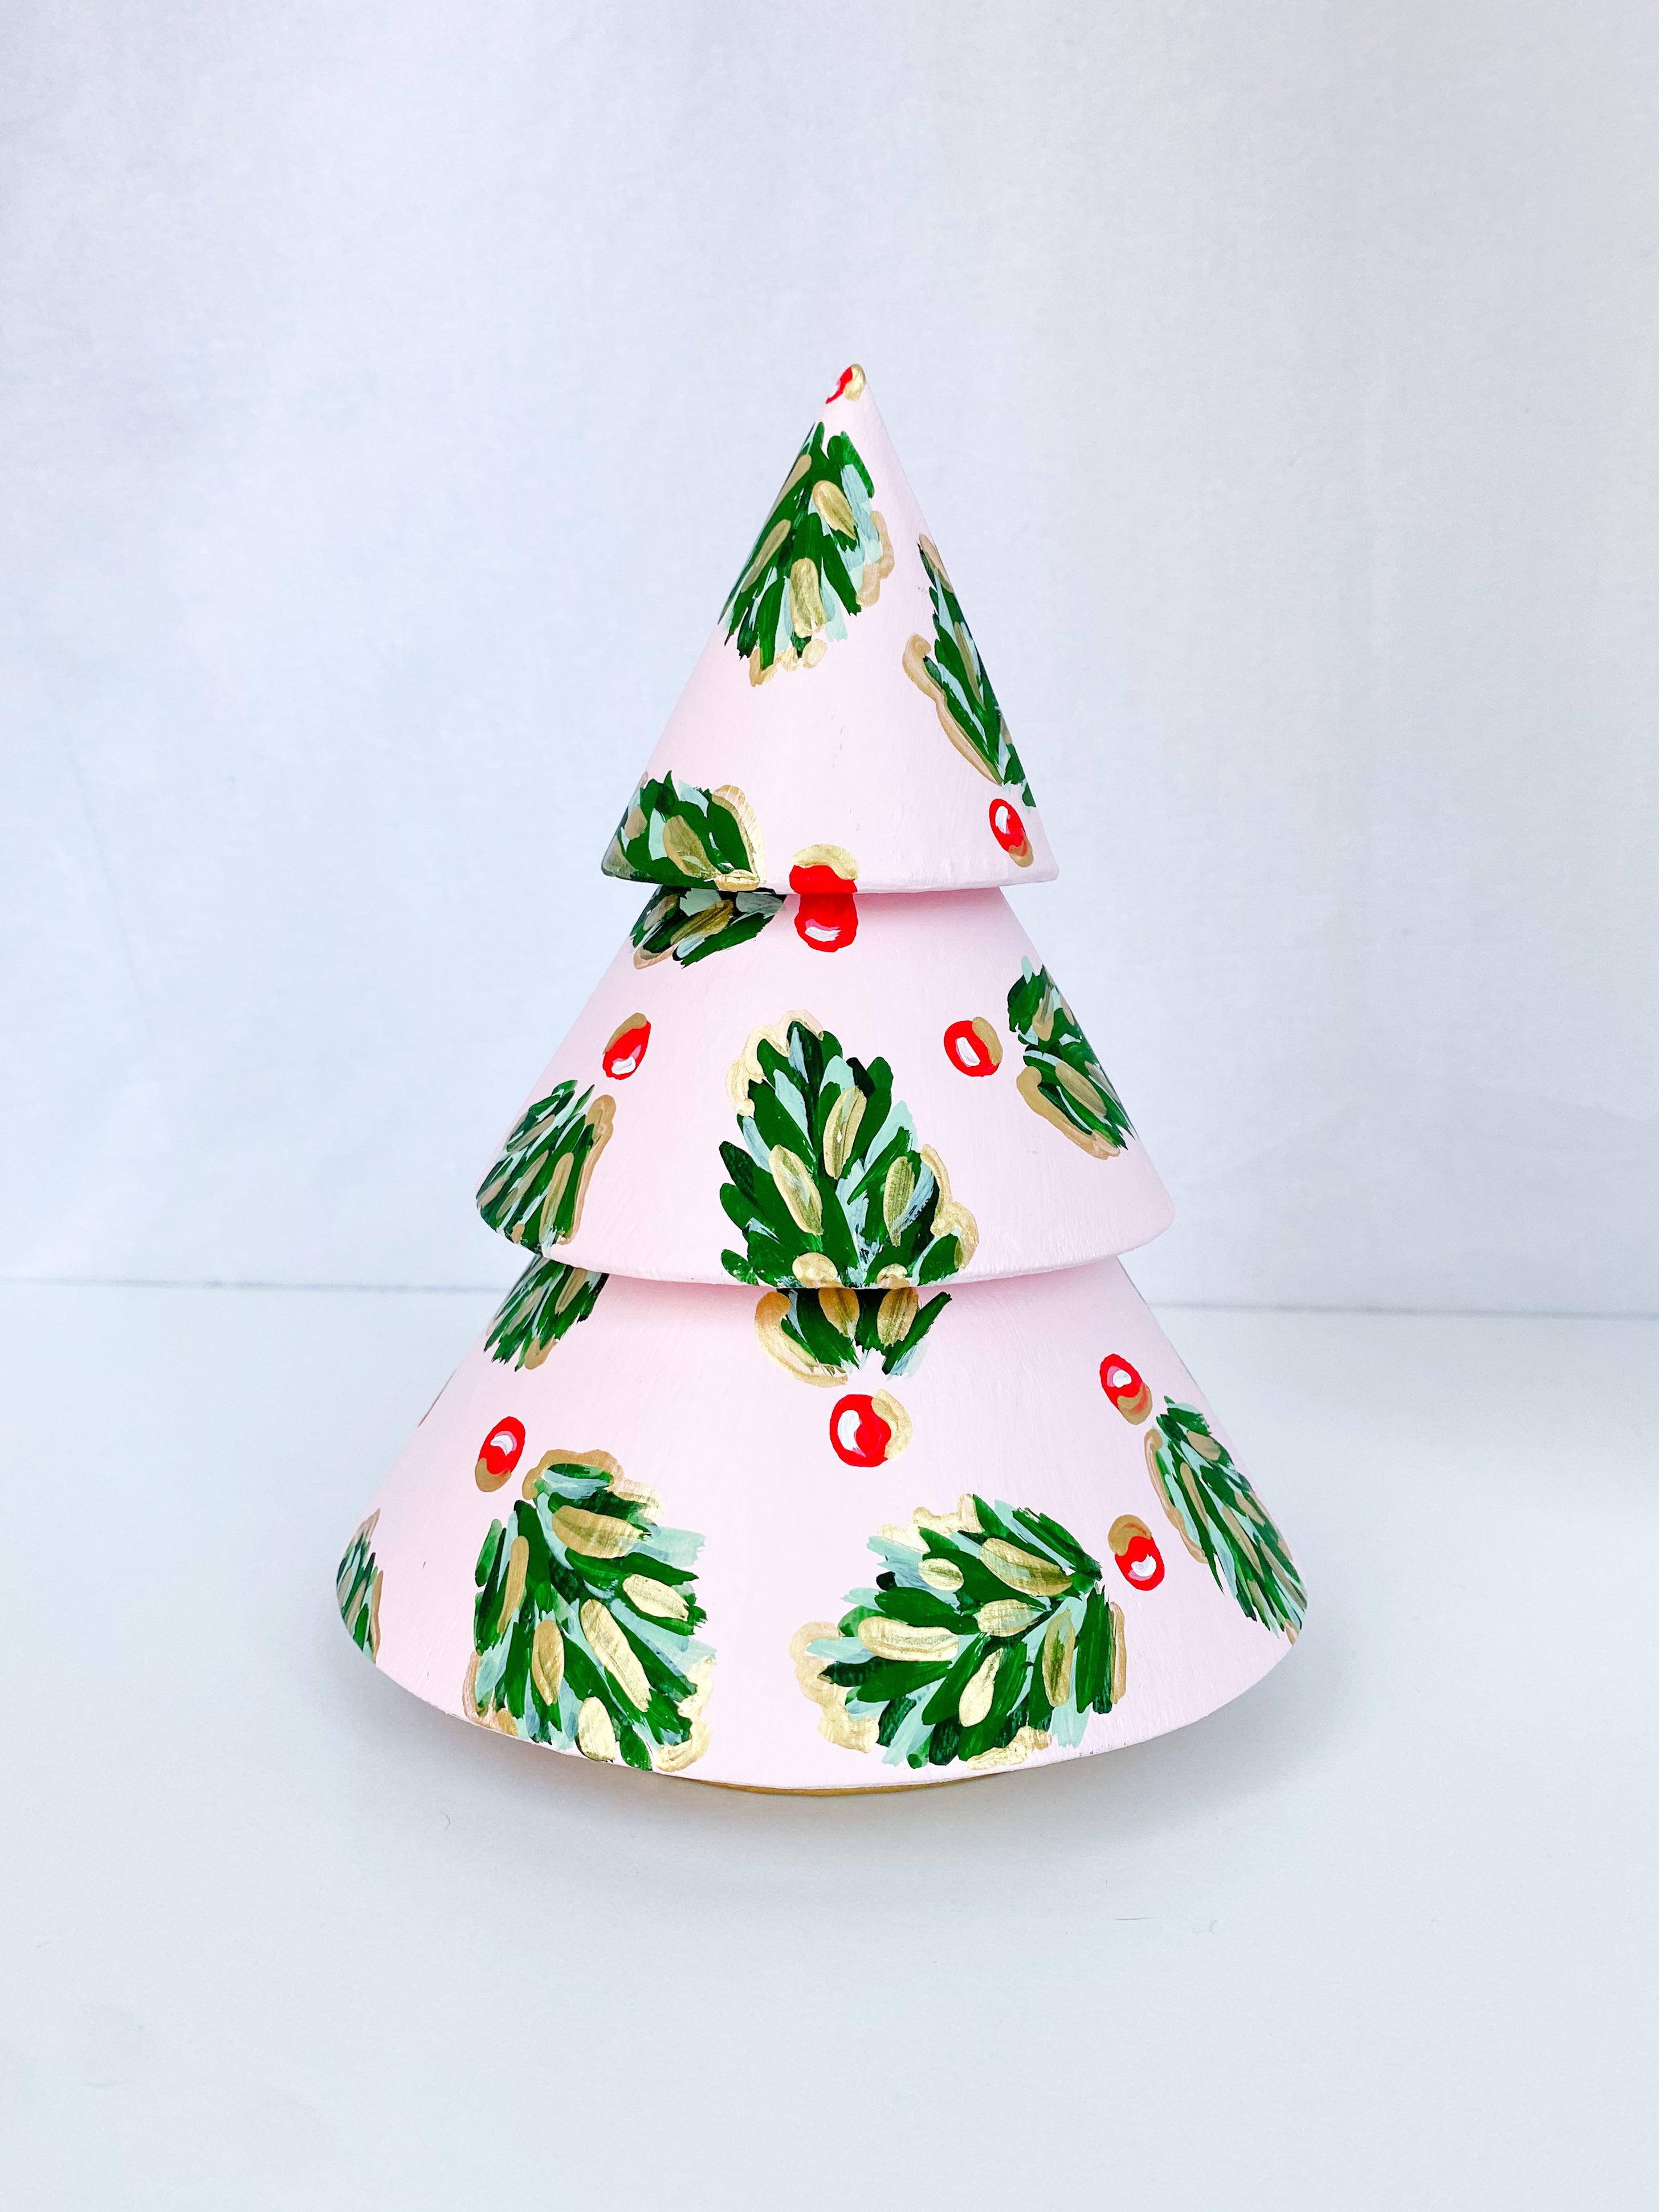 Frosty Pink Golden Holly Mini Tree - Short-Hand-Painted Mini Christmas Tree | Measures 7.5" tall and approx. 5.5" wide | Features the Golden Holly design with a pale pink base and shimmery gold accents and gold trunk | Light-weight and non-breakable paper mache tree | Coated with a protective matte finish that will keep it shimmering year after year | Each tree is slightly different with potential small imperfections due to the hand-painted nature, making each one special and unique!-The Singing Little Bird